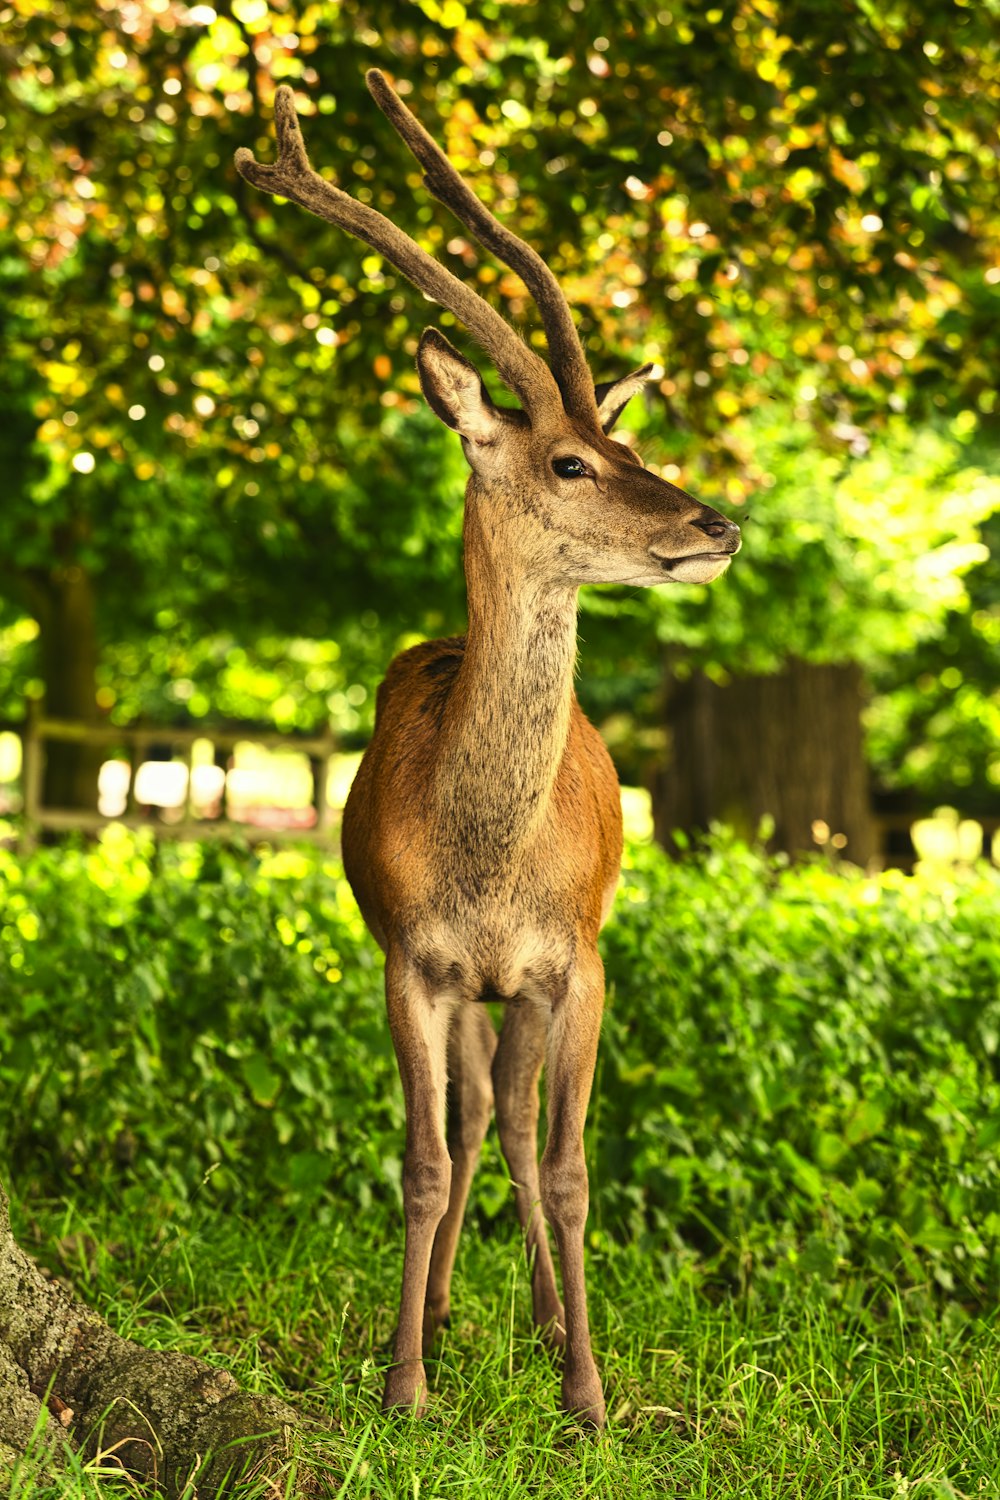 a deer standing in a grassy area